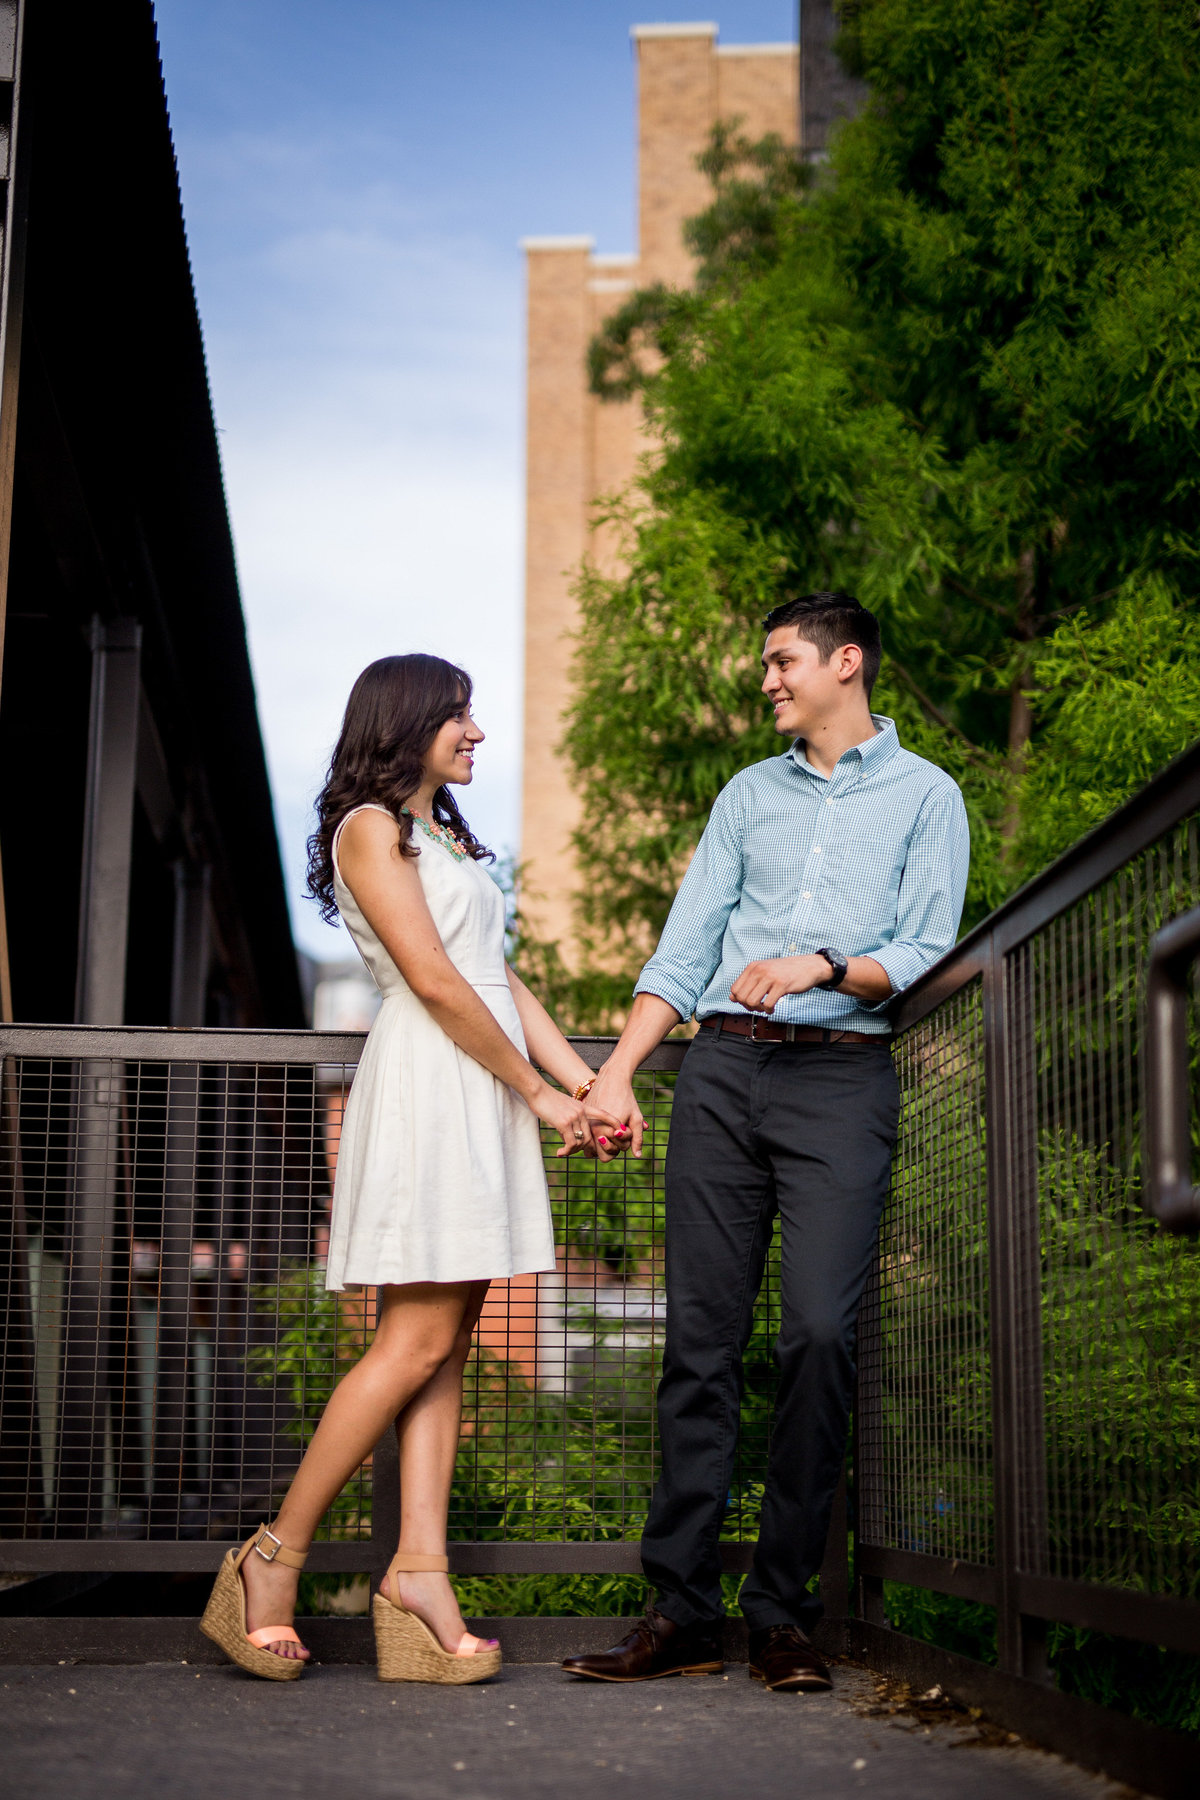 Beautiful young woman engaged to handsome man and they are holding hands at the top of stairs in San Antonio at the Historic Pearl.